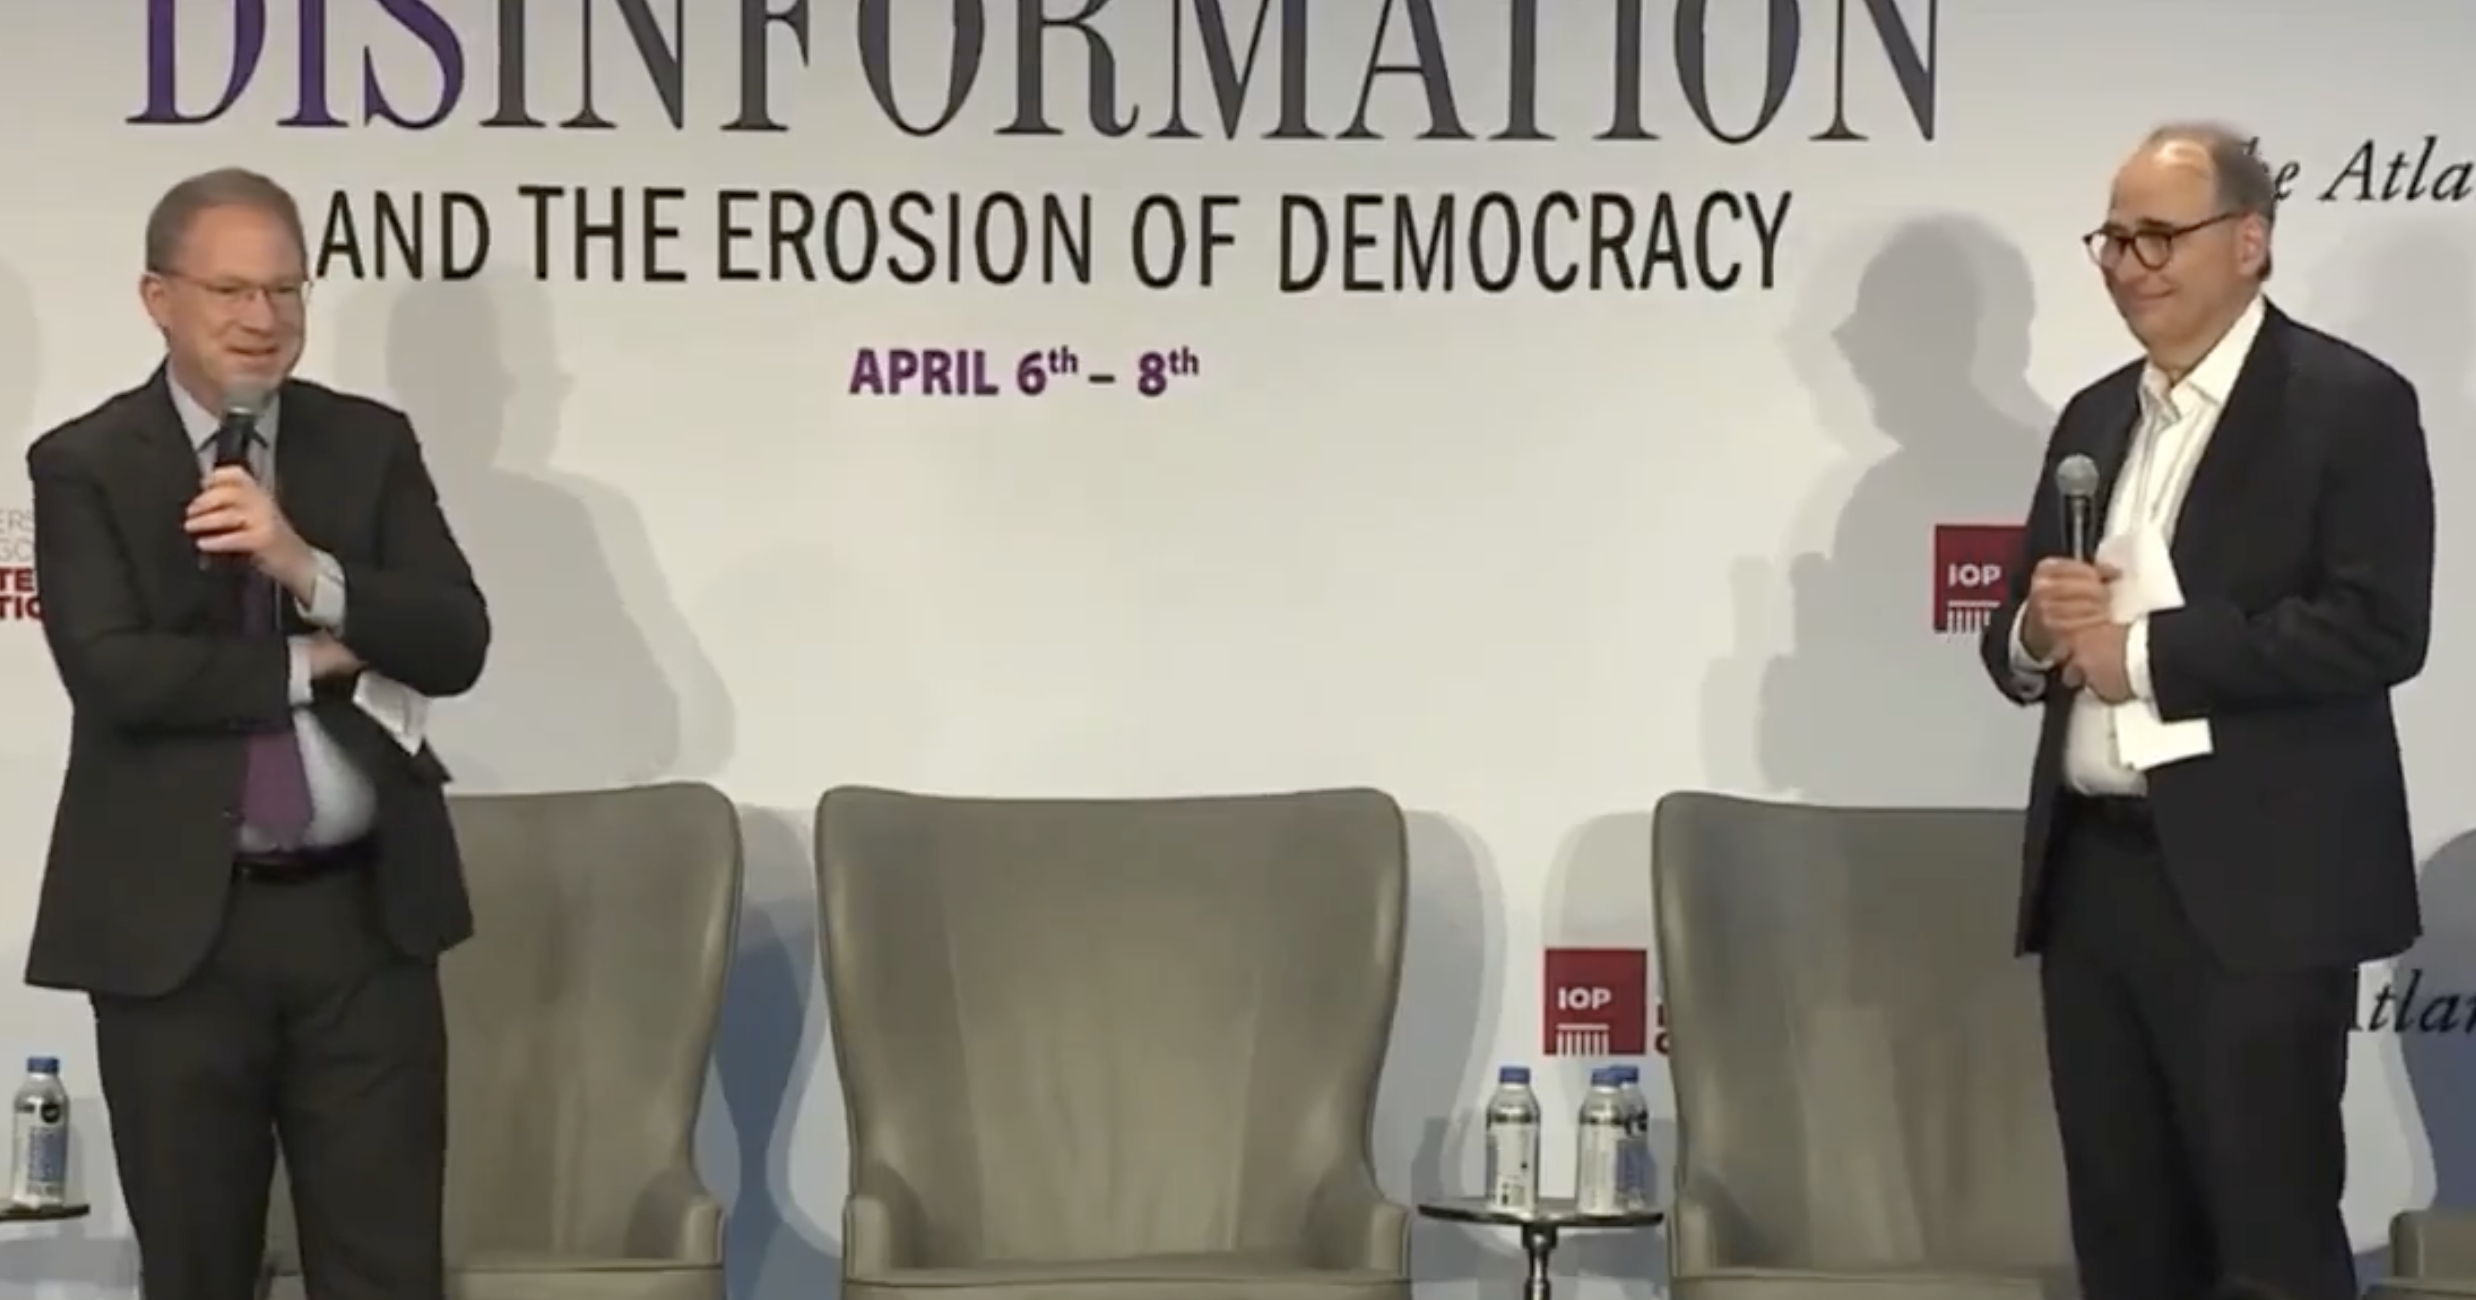 Atlantic Editor-in-Chief takes right-wing student ‘reporters’ at ‘Disinformation’ conference to the woodshed for waging amateurish ‘disinformation campaigns’ (mediaite.com)